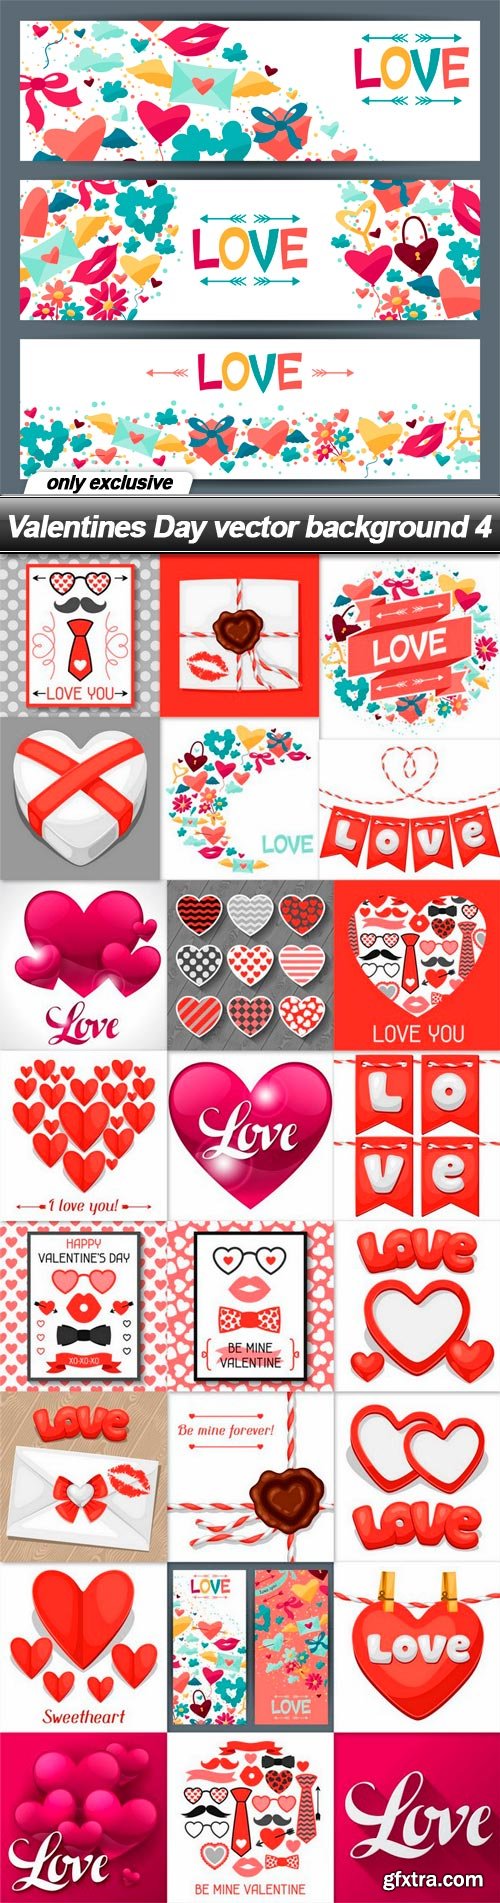 Valentines Day vector background 4 - 25 EPS